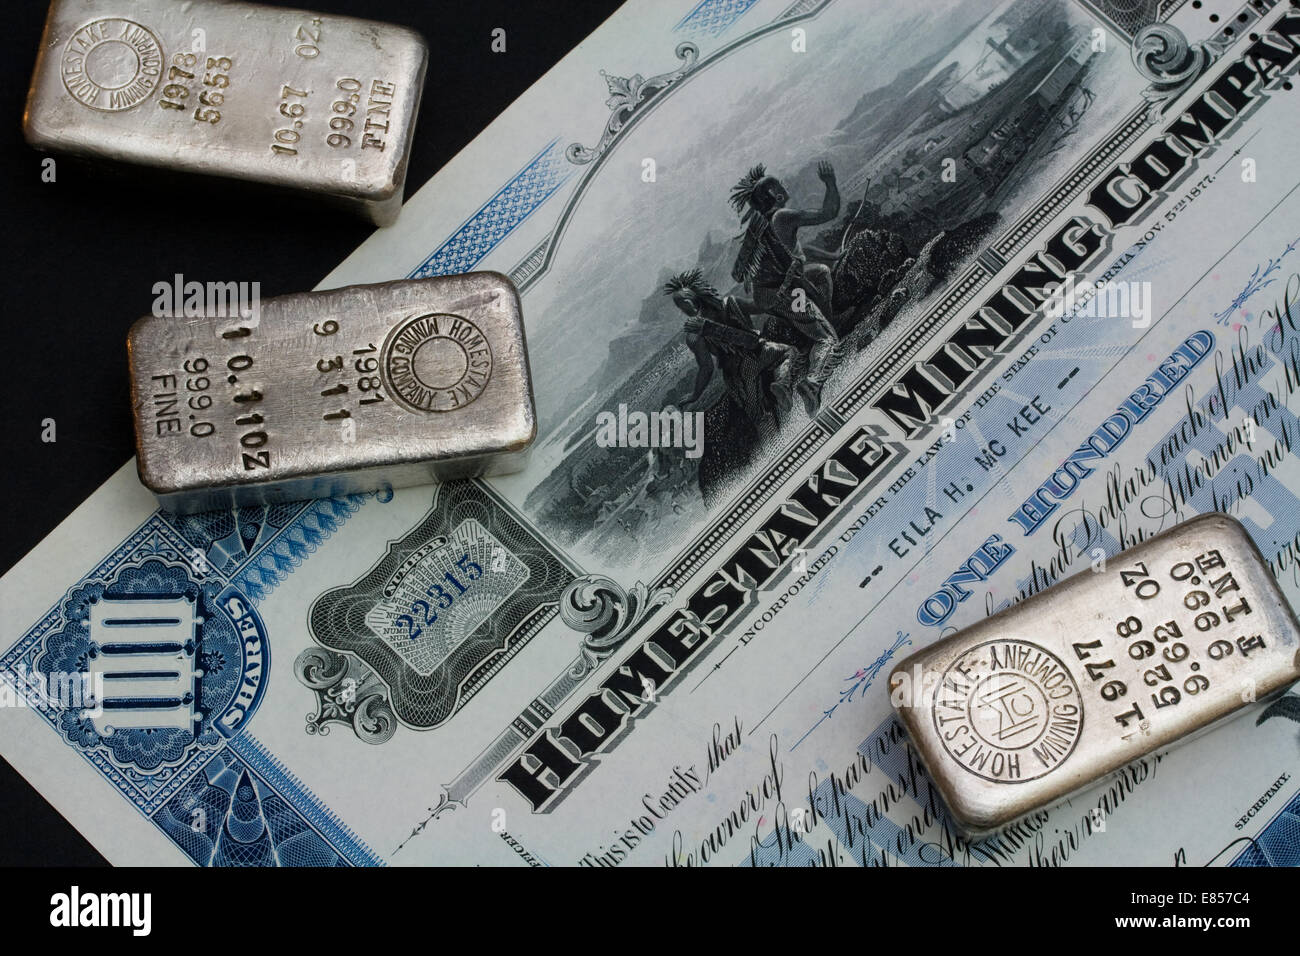 Original Homestake Mining Company Stock Certificate and Silver Bars from the Mine, Located at Lead, South Dakota USA Stock Photo